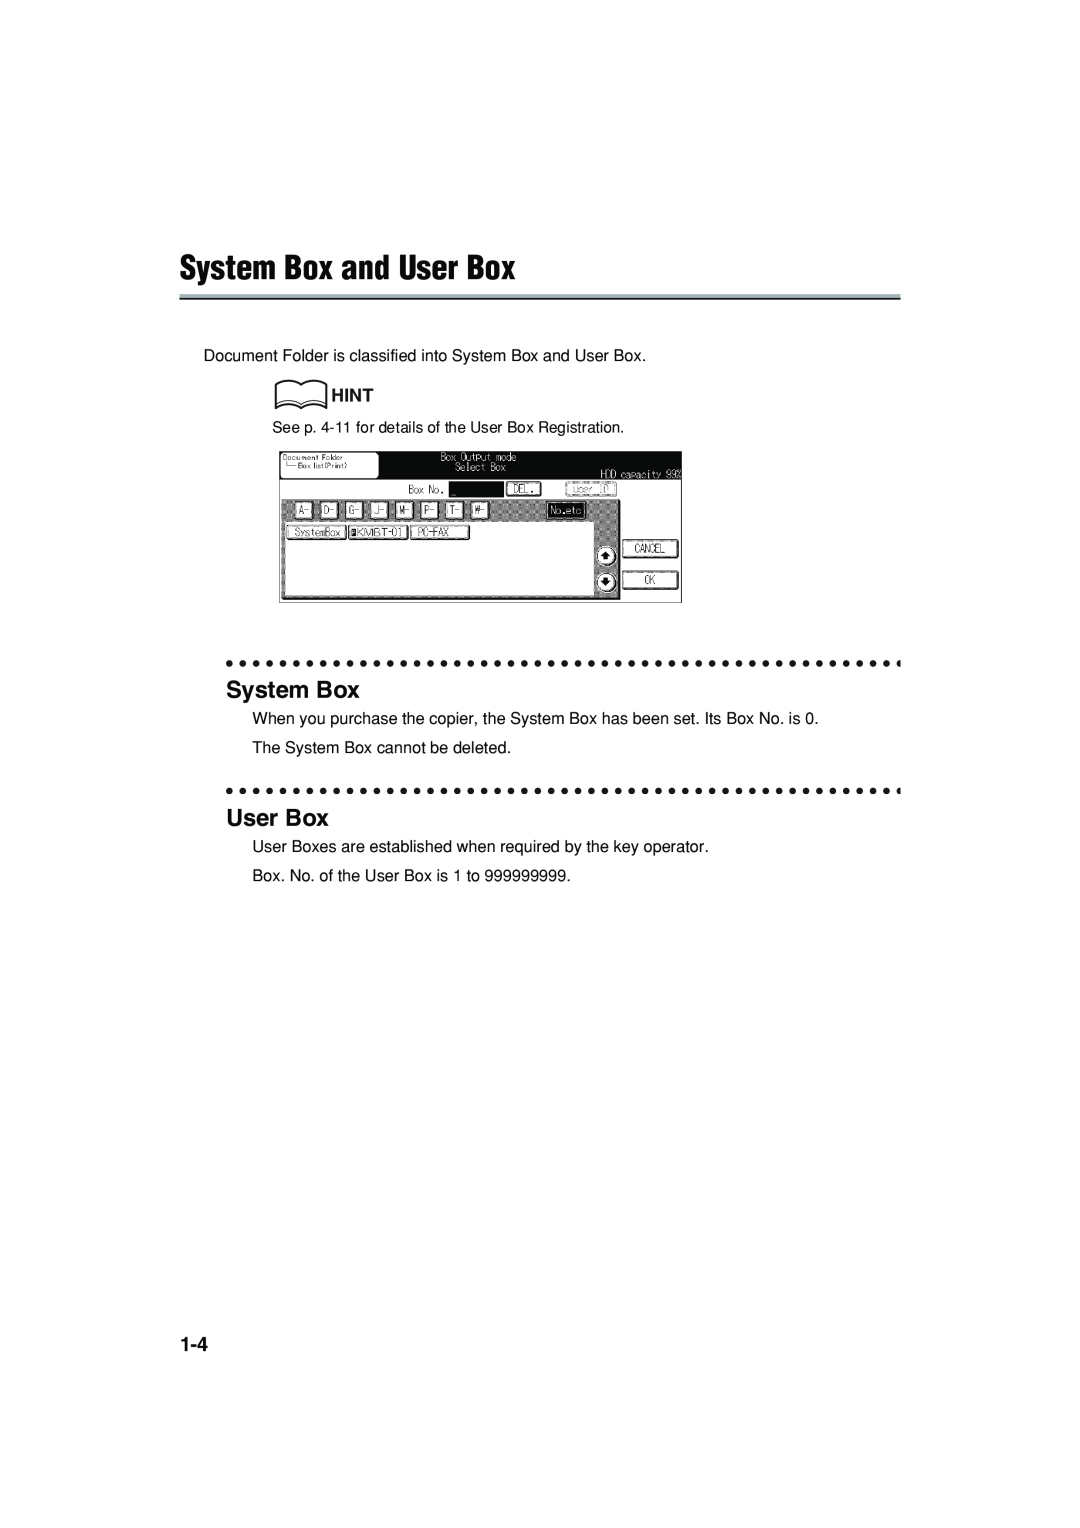 Konica Minolta 7222 Hint, Document Folder is classified into System Box and User Box, Box. No. of the User Box is 1 to 